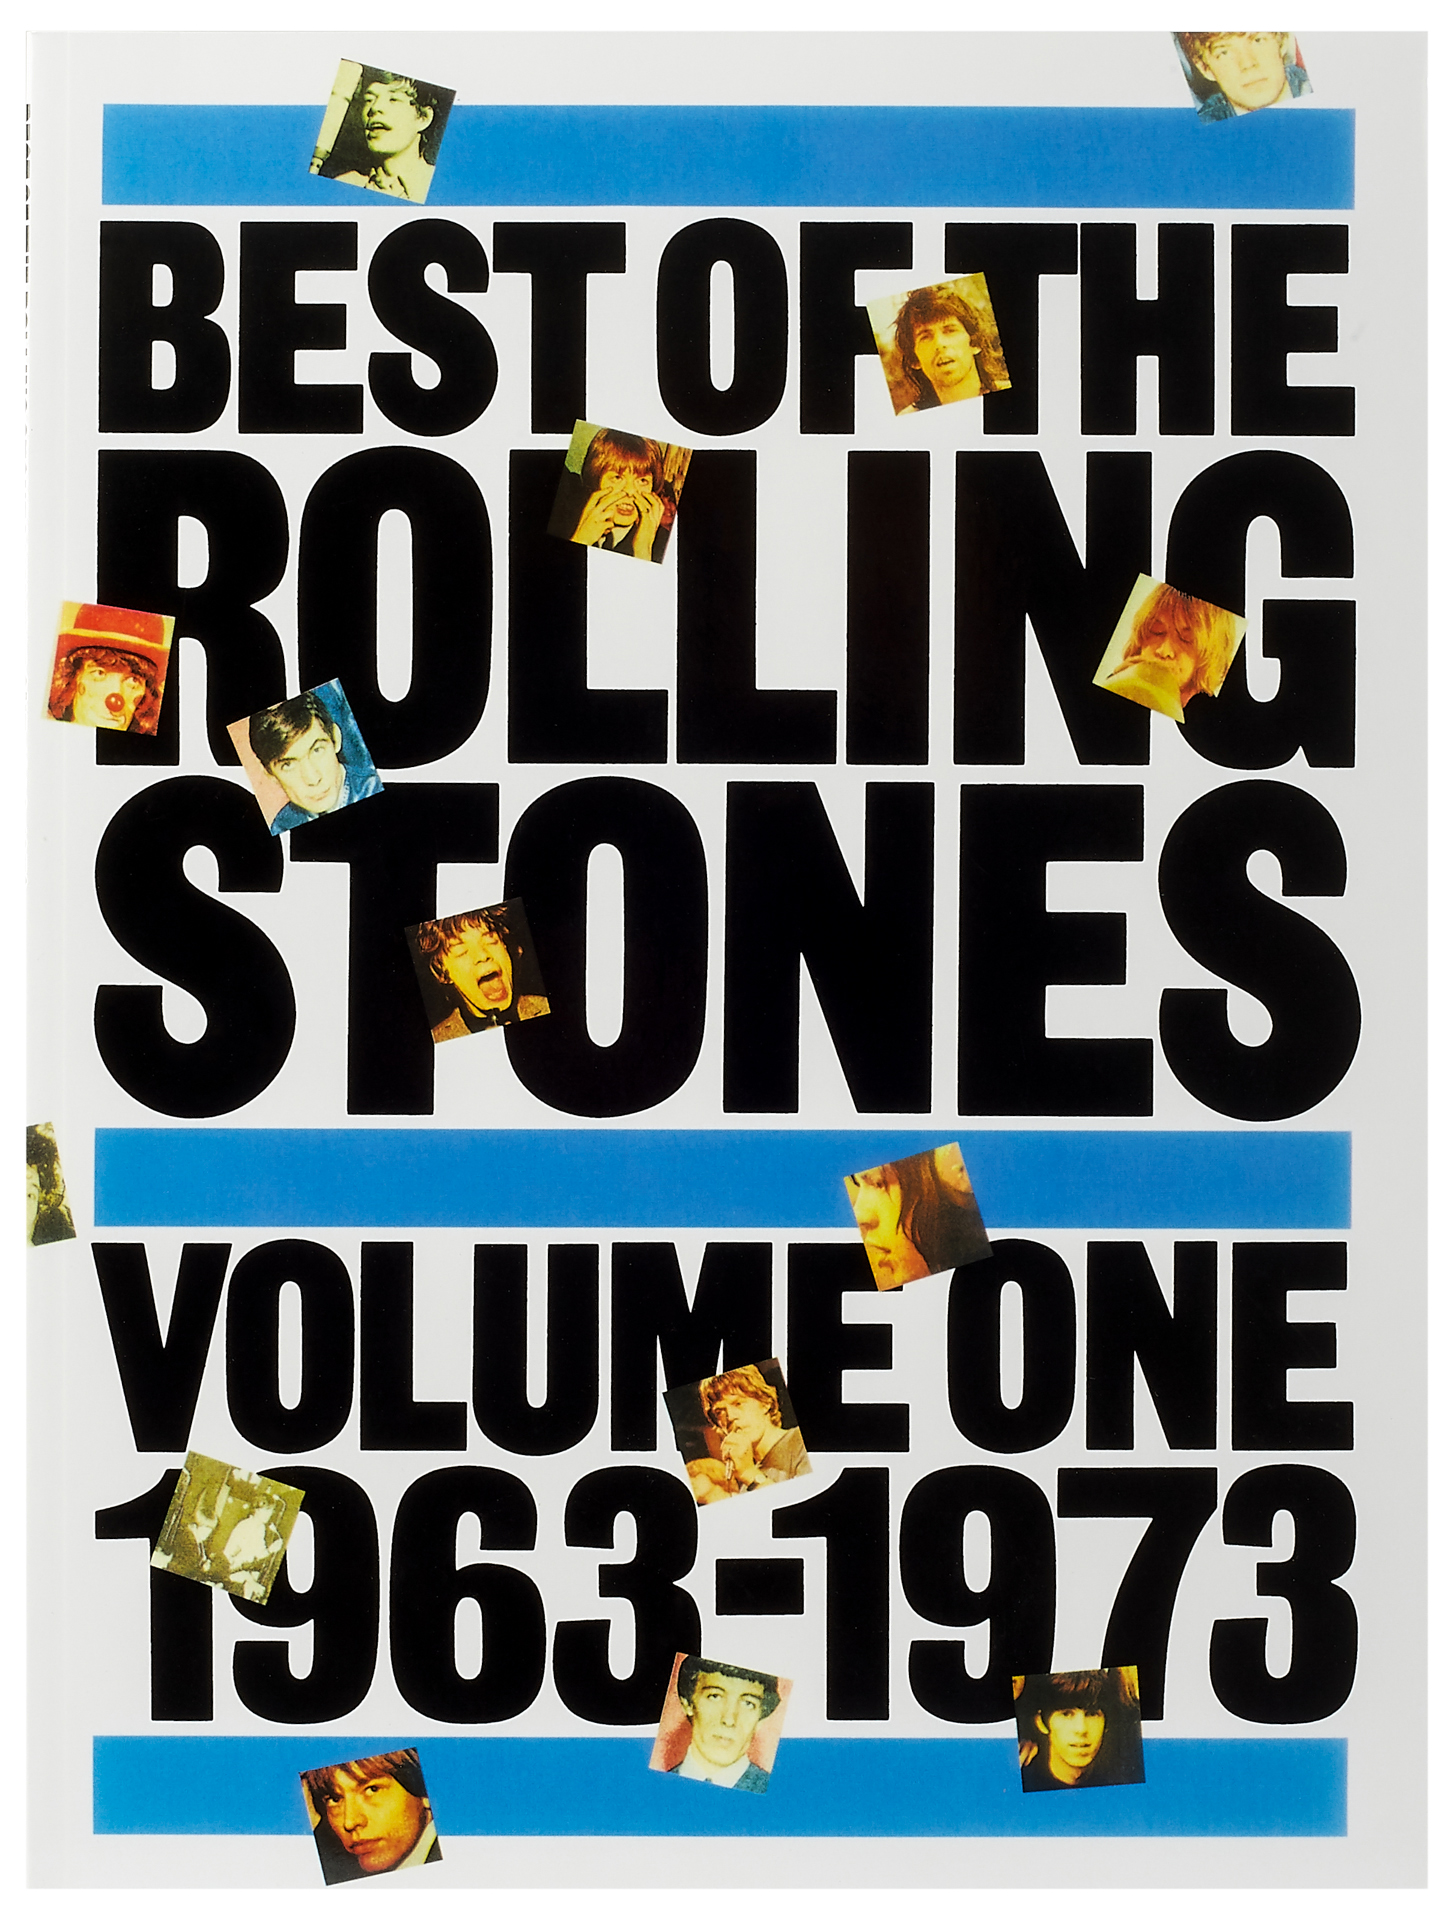 MS Rolling Stones Best Of The Volume One 1963-1973 | Obrázok 1 | eplay.sk